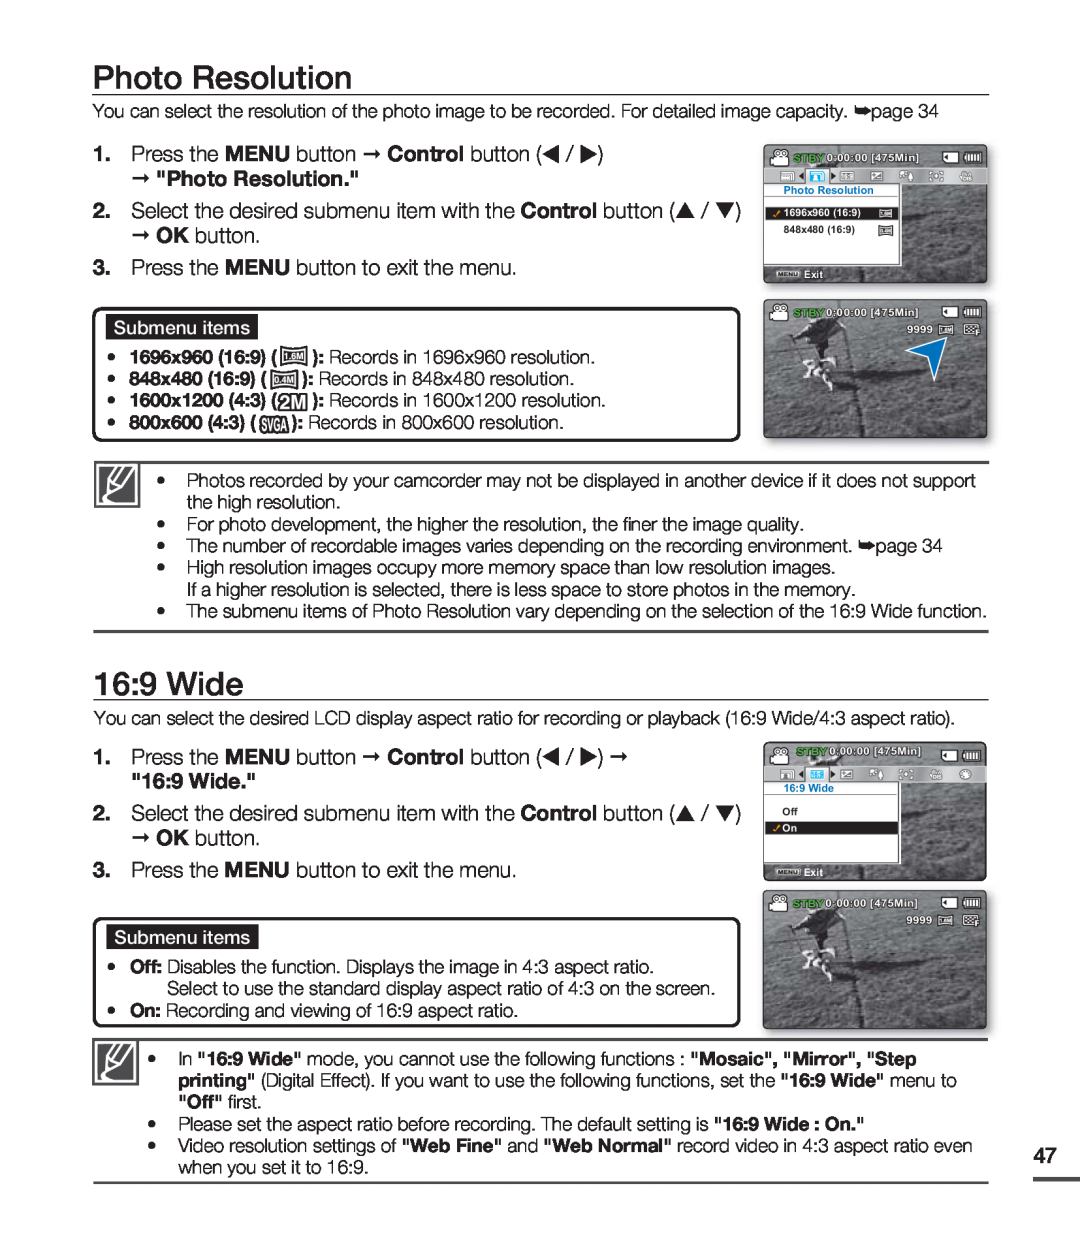 Samsung SMX-C20RP/AAW manual Photo Resolution, Wide, OK button 3. Press the MENU button to exit the menu, Submenu items 